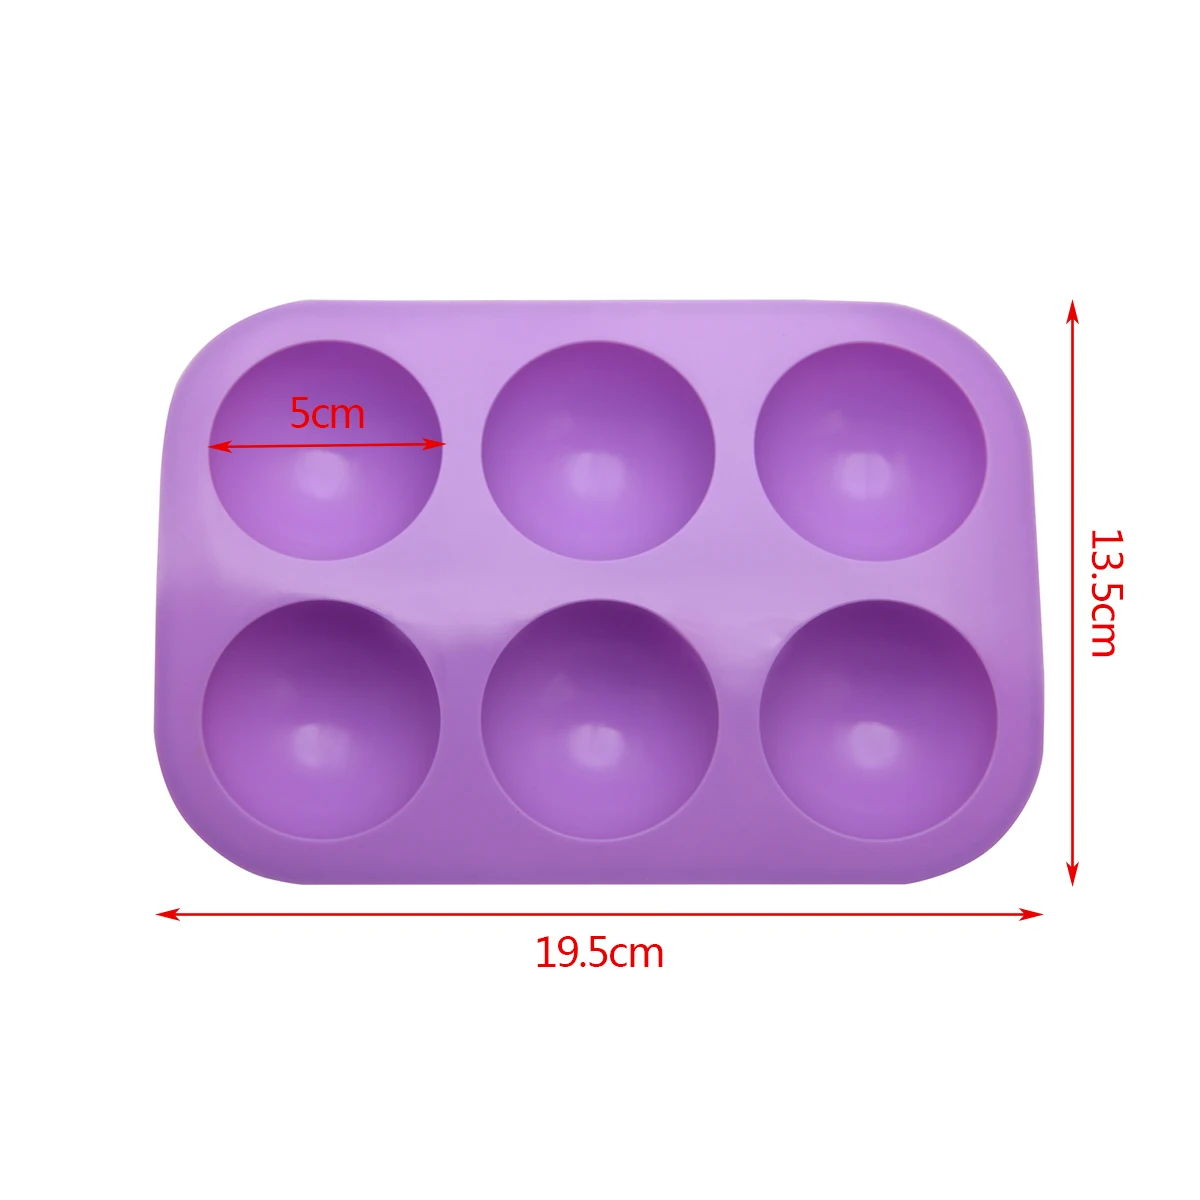 Silicone Baking Mold Half Ball Sphere Mould DIY Chocolate Cupcake Cake Molds 6 Holes Kitchen Bakeware Tool